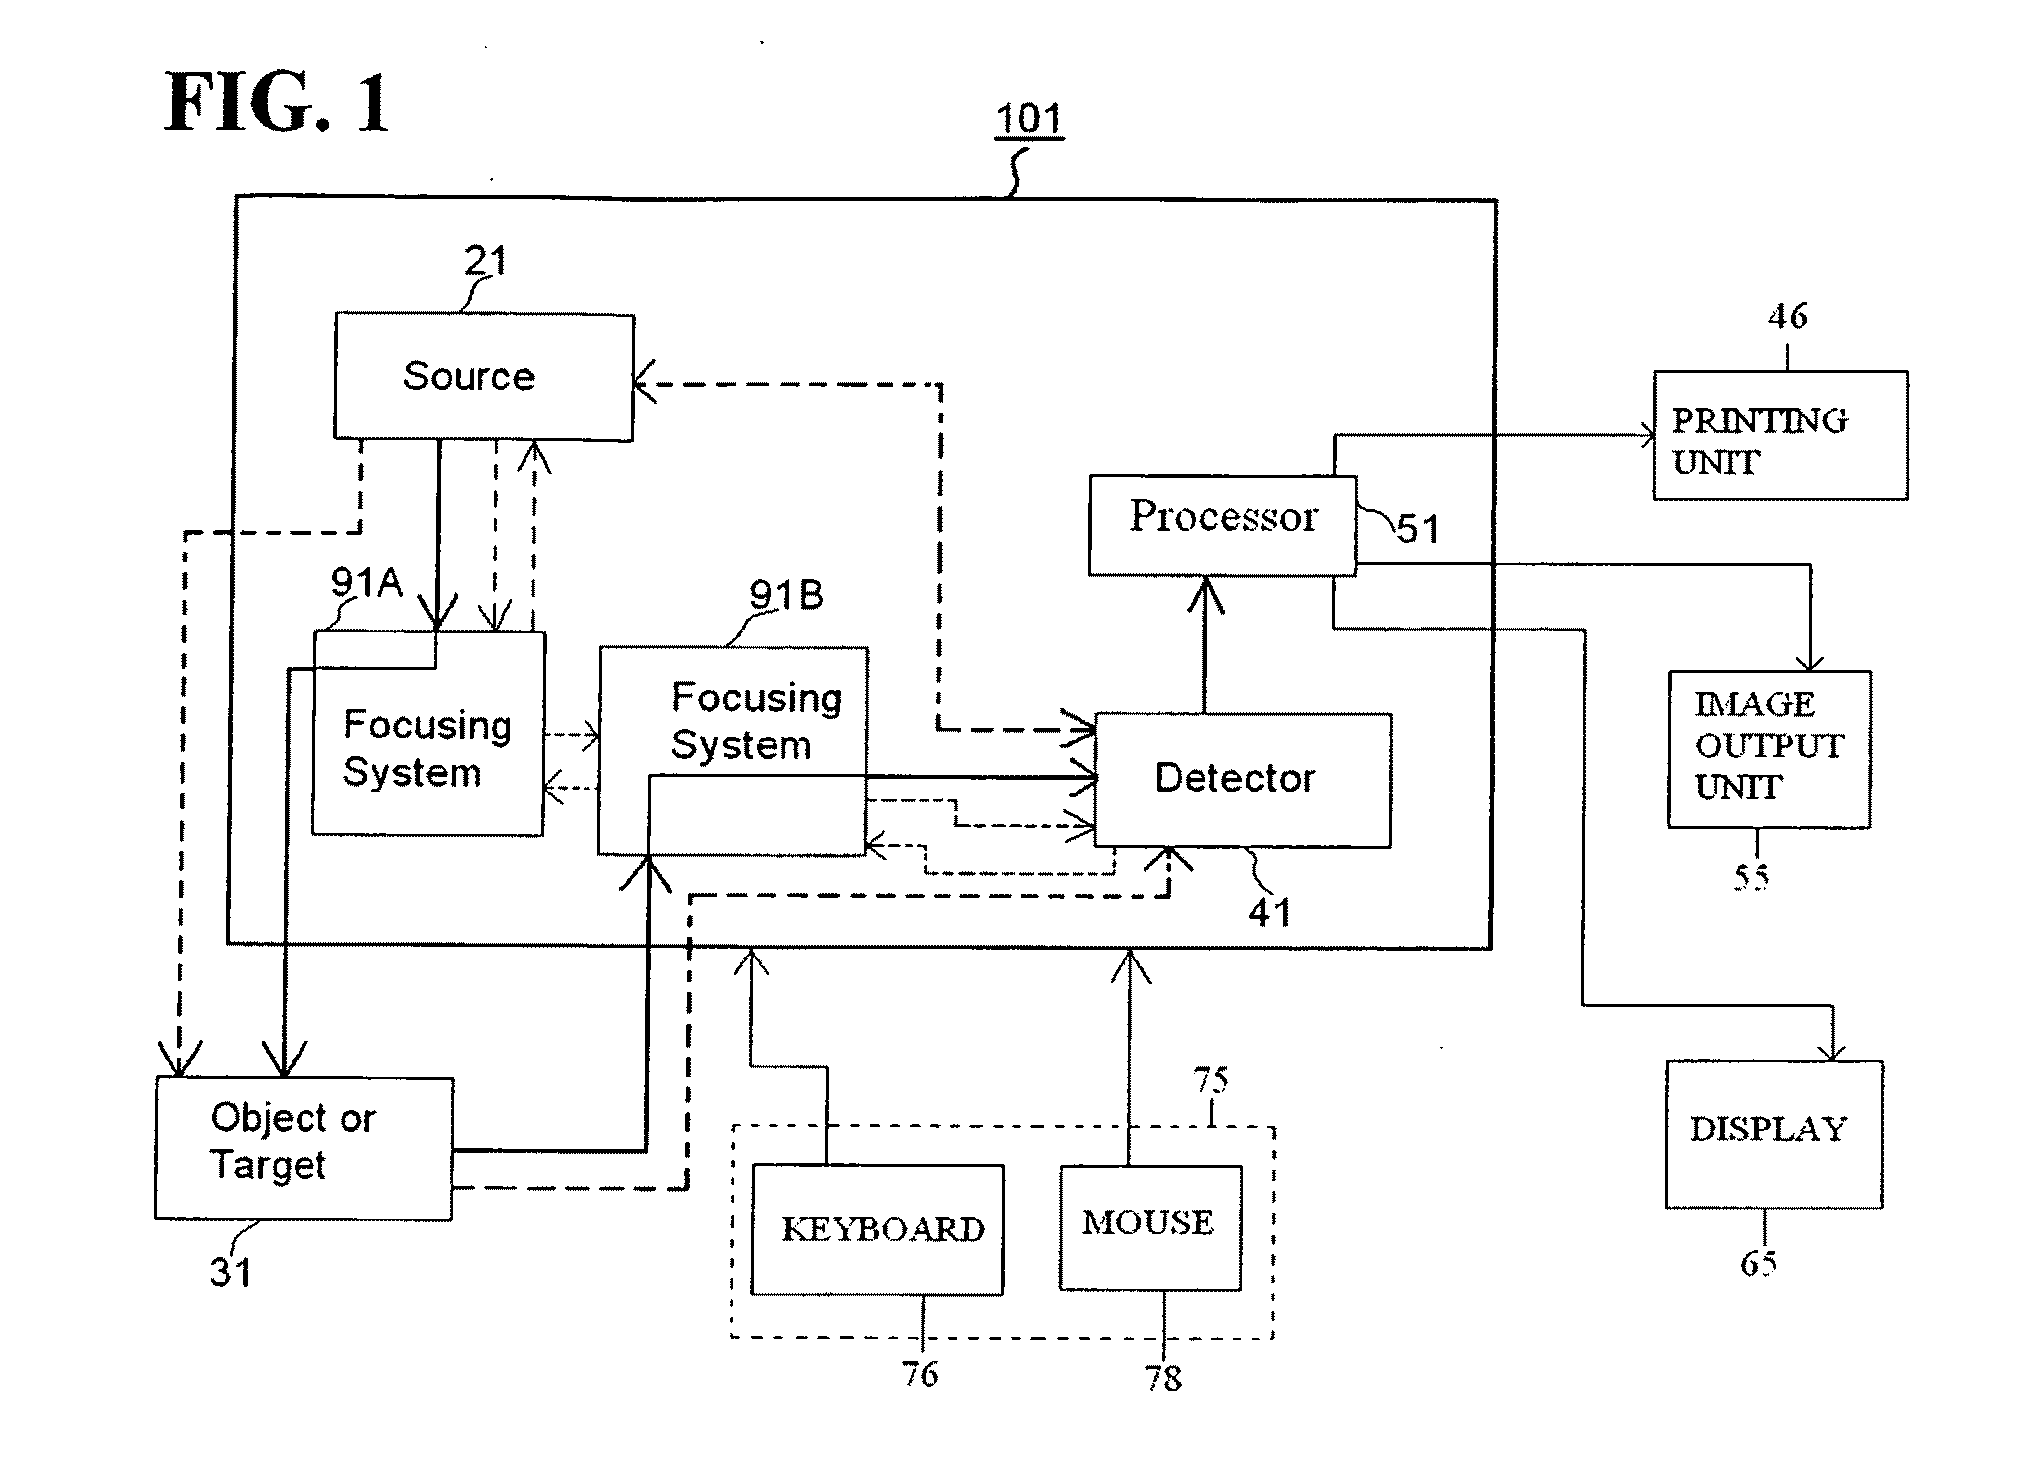 Direct magnetic imaging apparatus and method